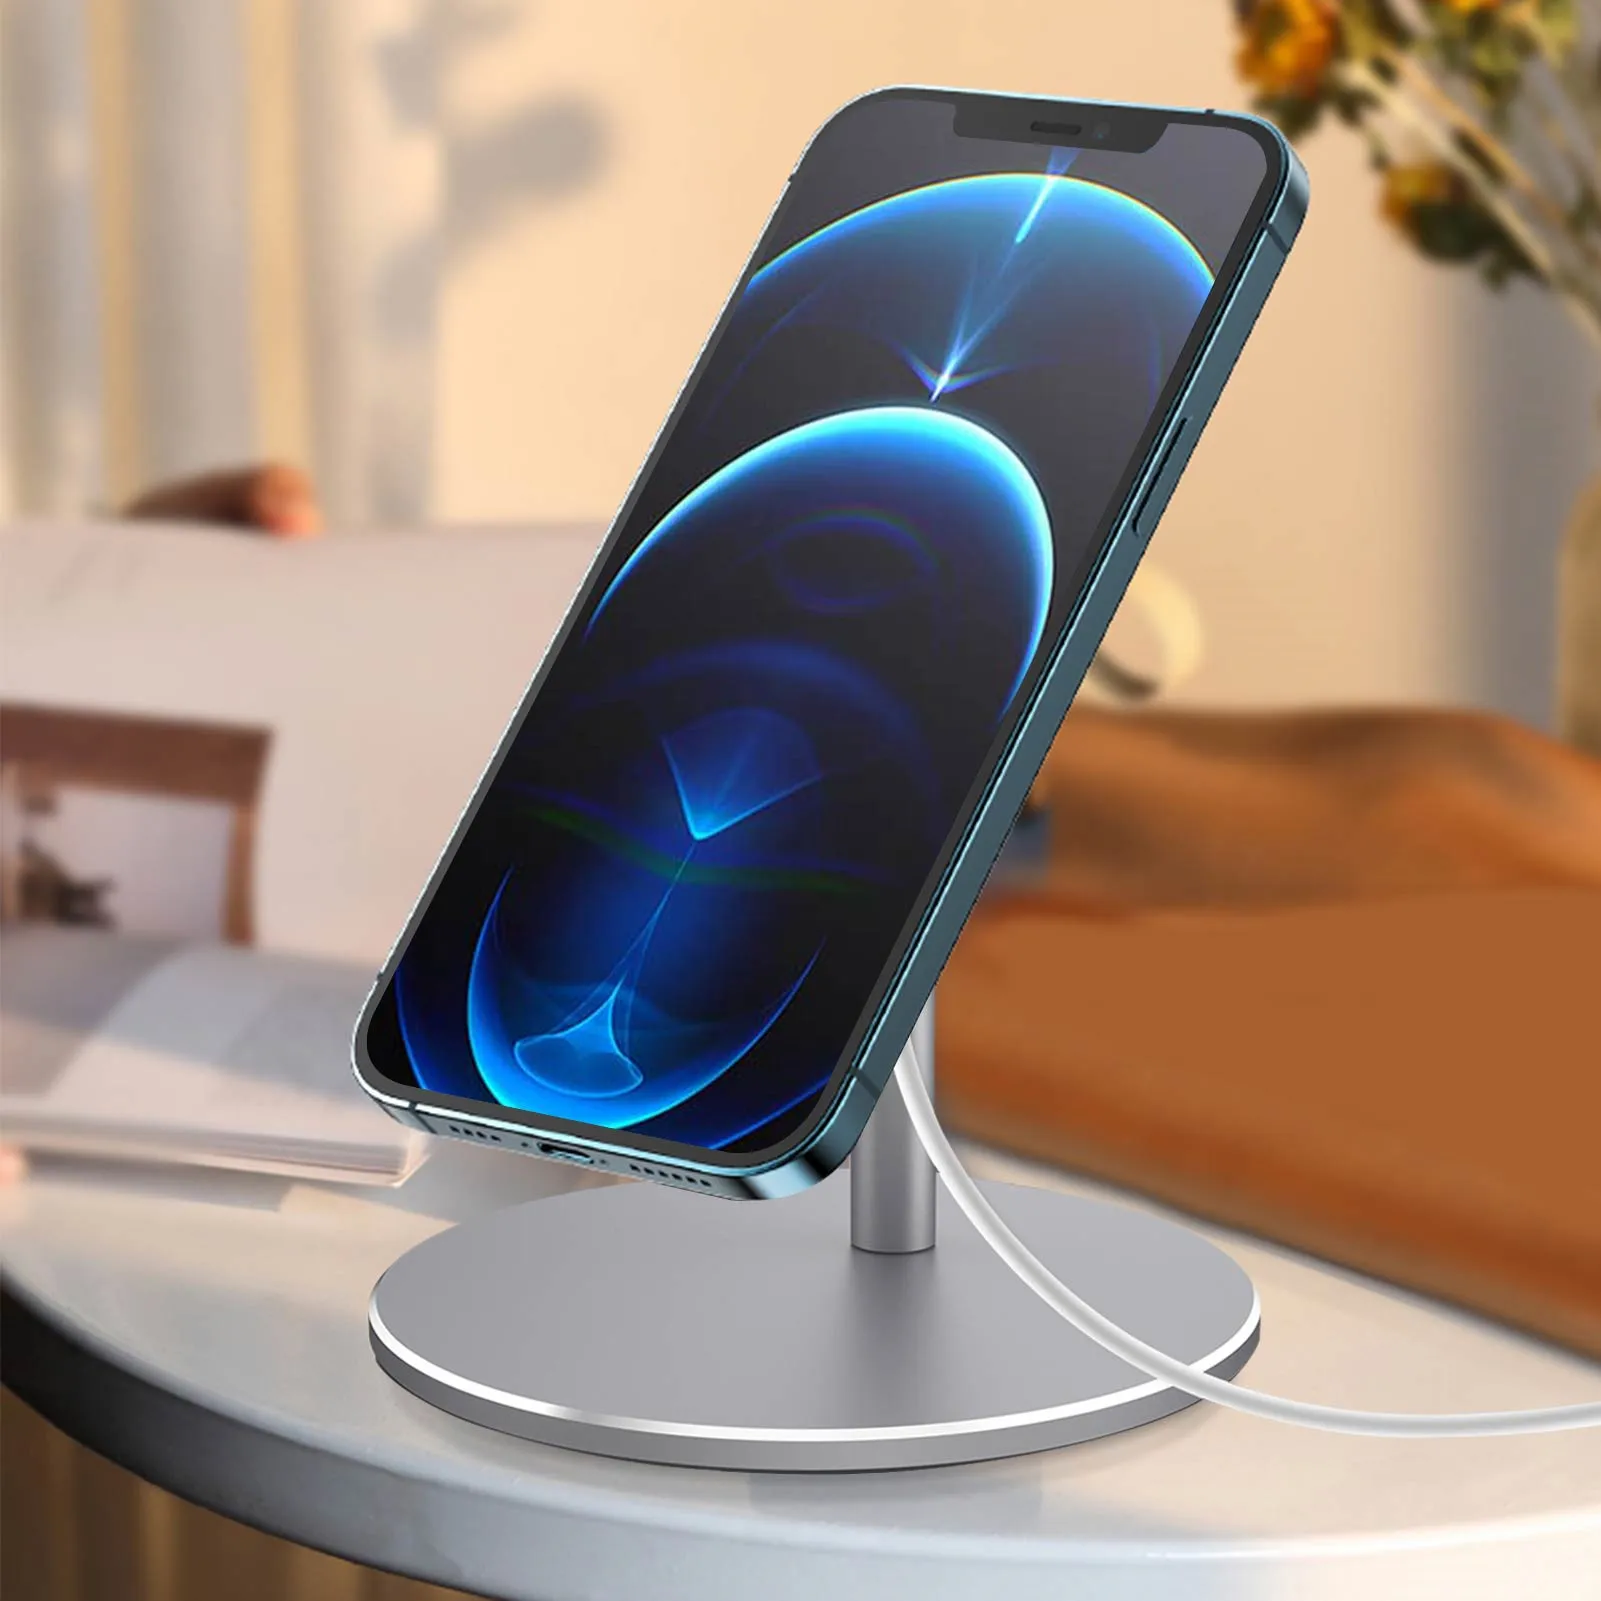 Magnetic Phone Holder Magsafes Wireless Charging Stand Desktop Phone Charger For Iphone 12 Pro Max Mini Magnet Charging Bracket